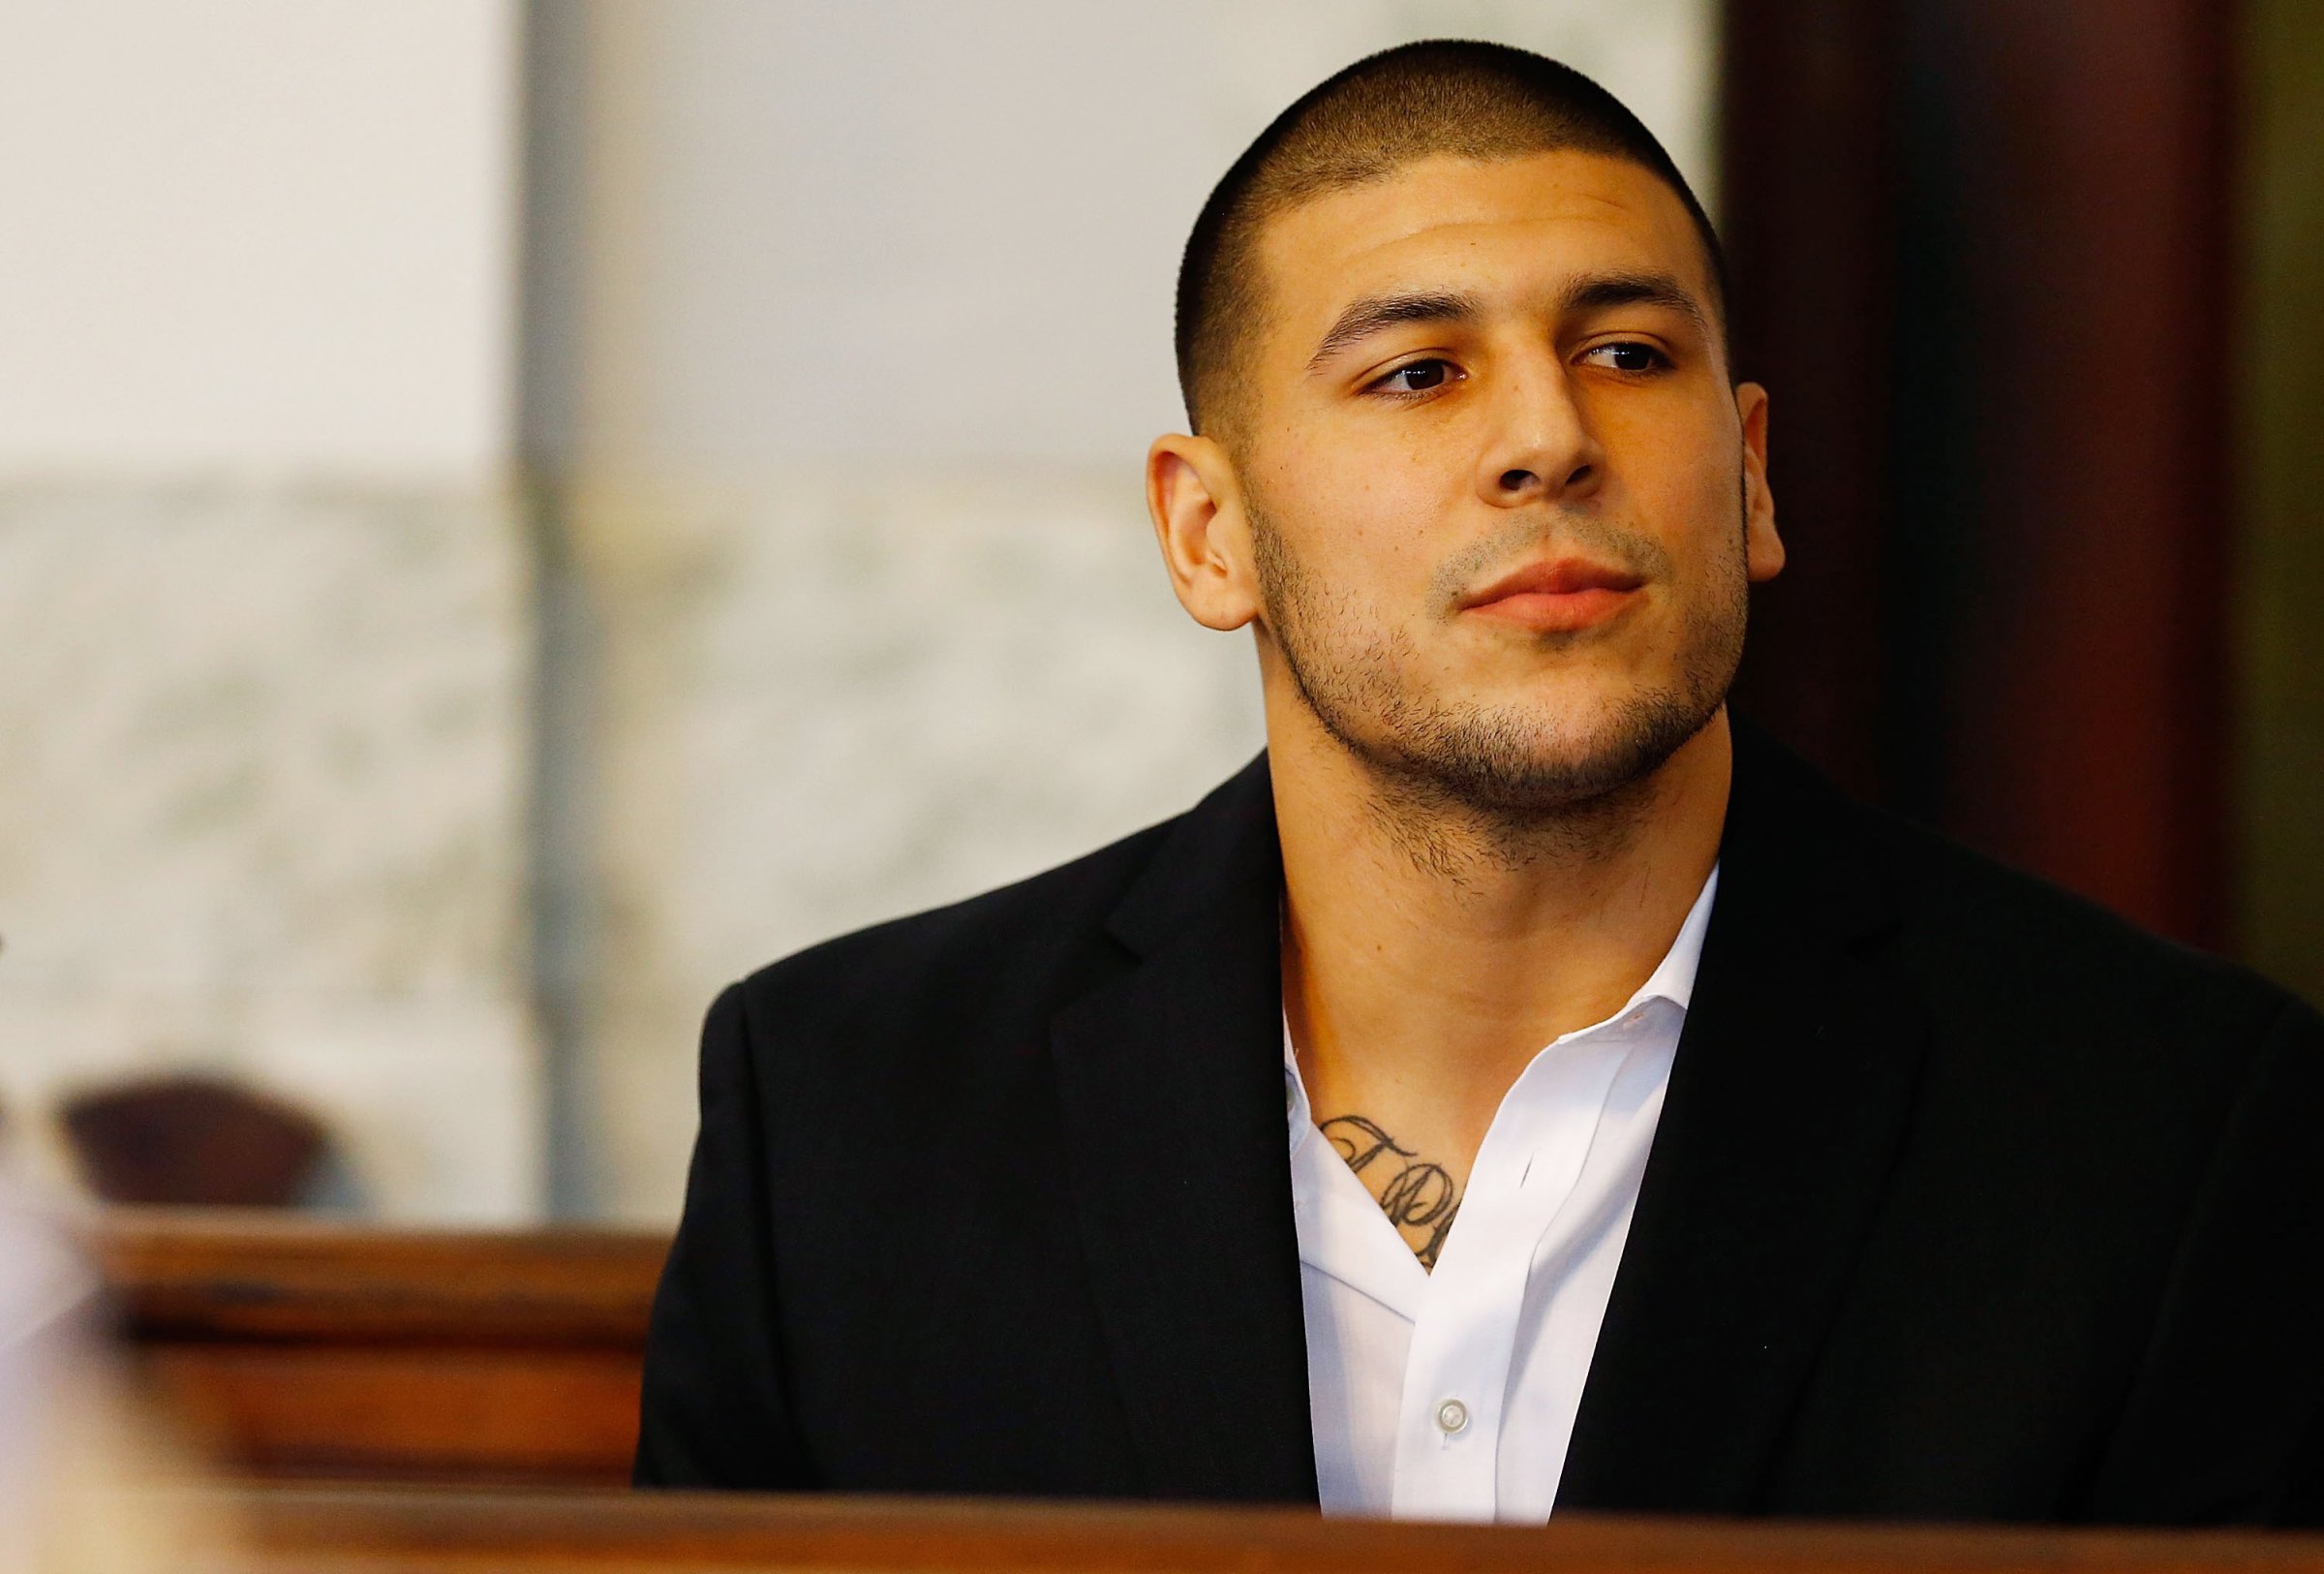 Aaron Hernandez sits in the courtroom of the Attleboro District Court during his hearing on Aug. 22, 2013 in North Attleboro, Massachusetts.